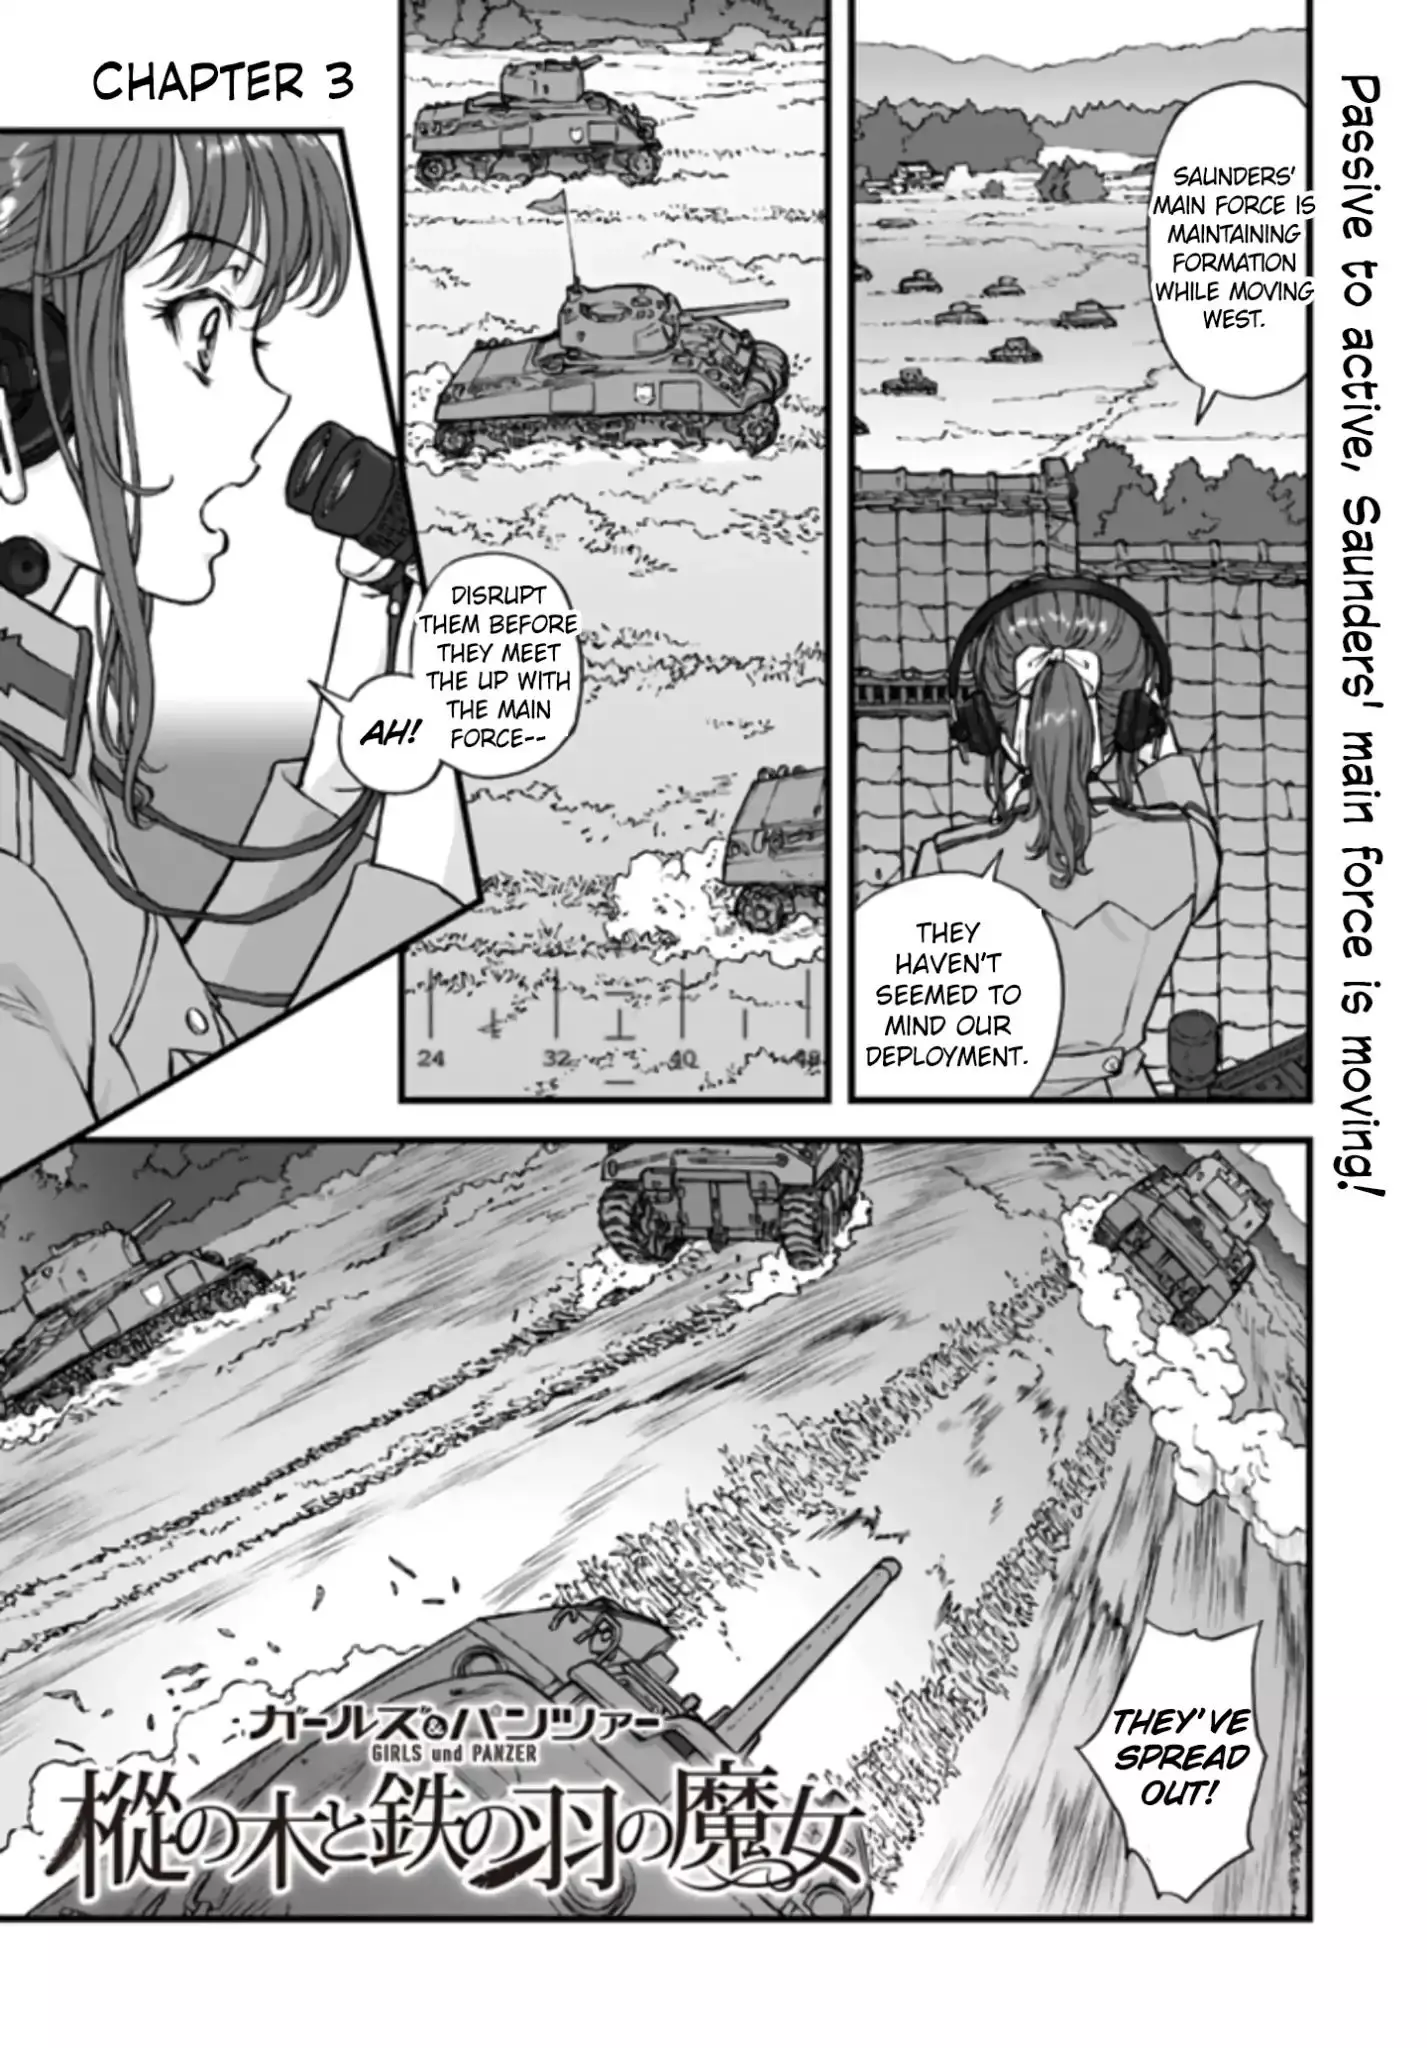 Girls Und Panzer - The Fir Tree And The Iron-Winged Witch - 3 page 1